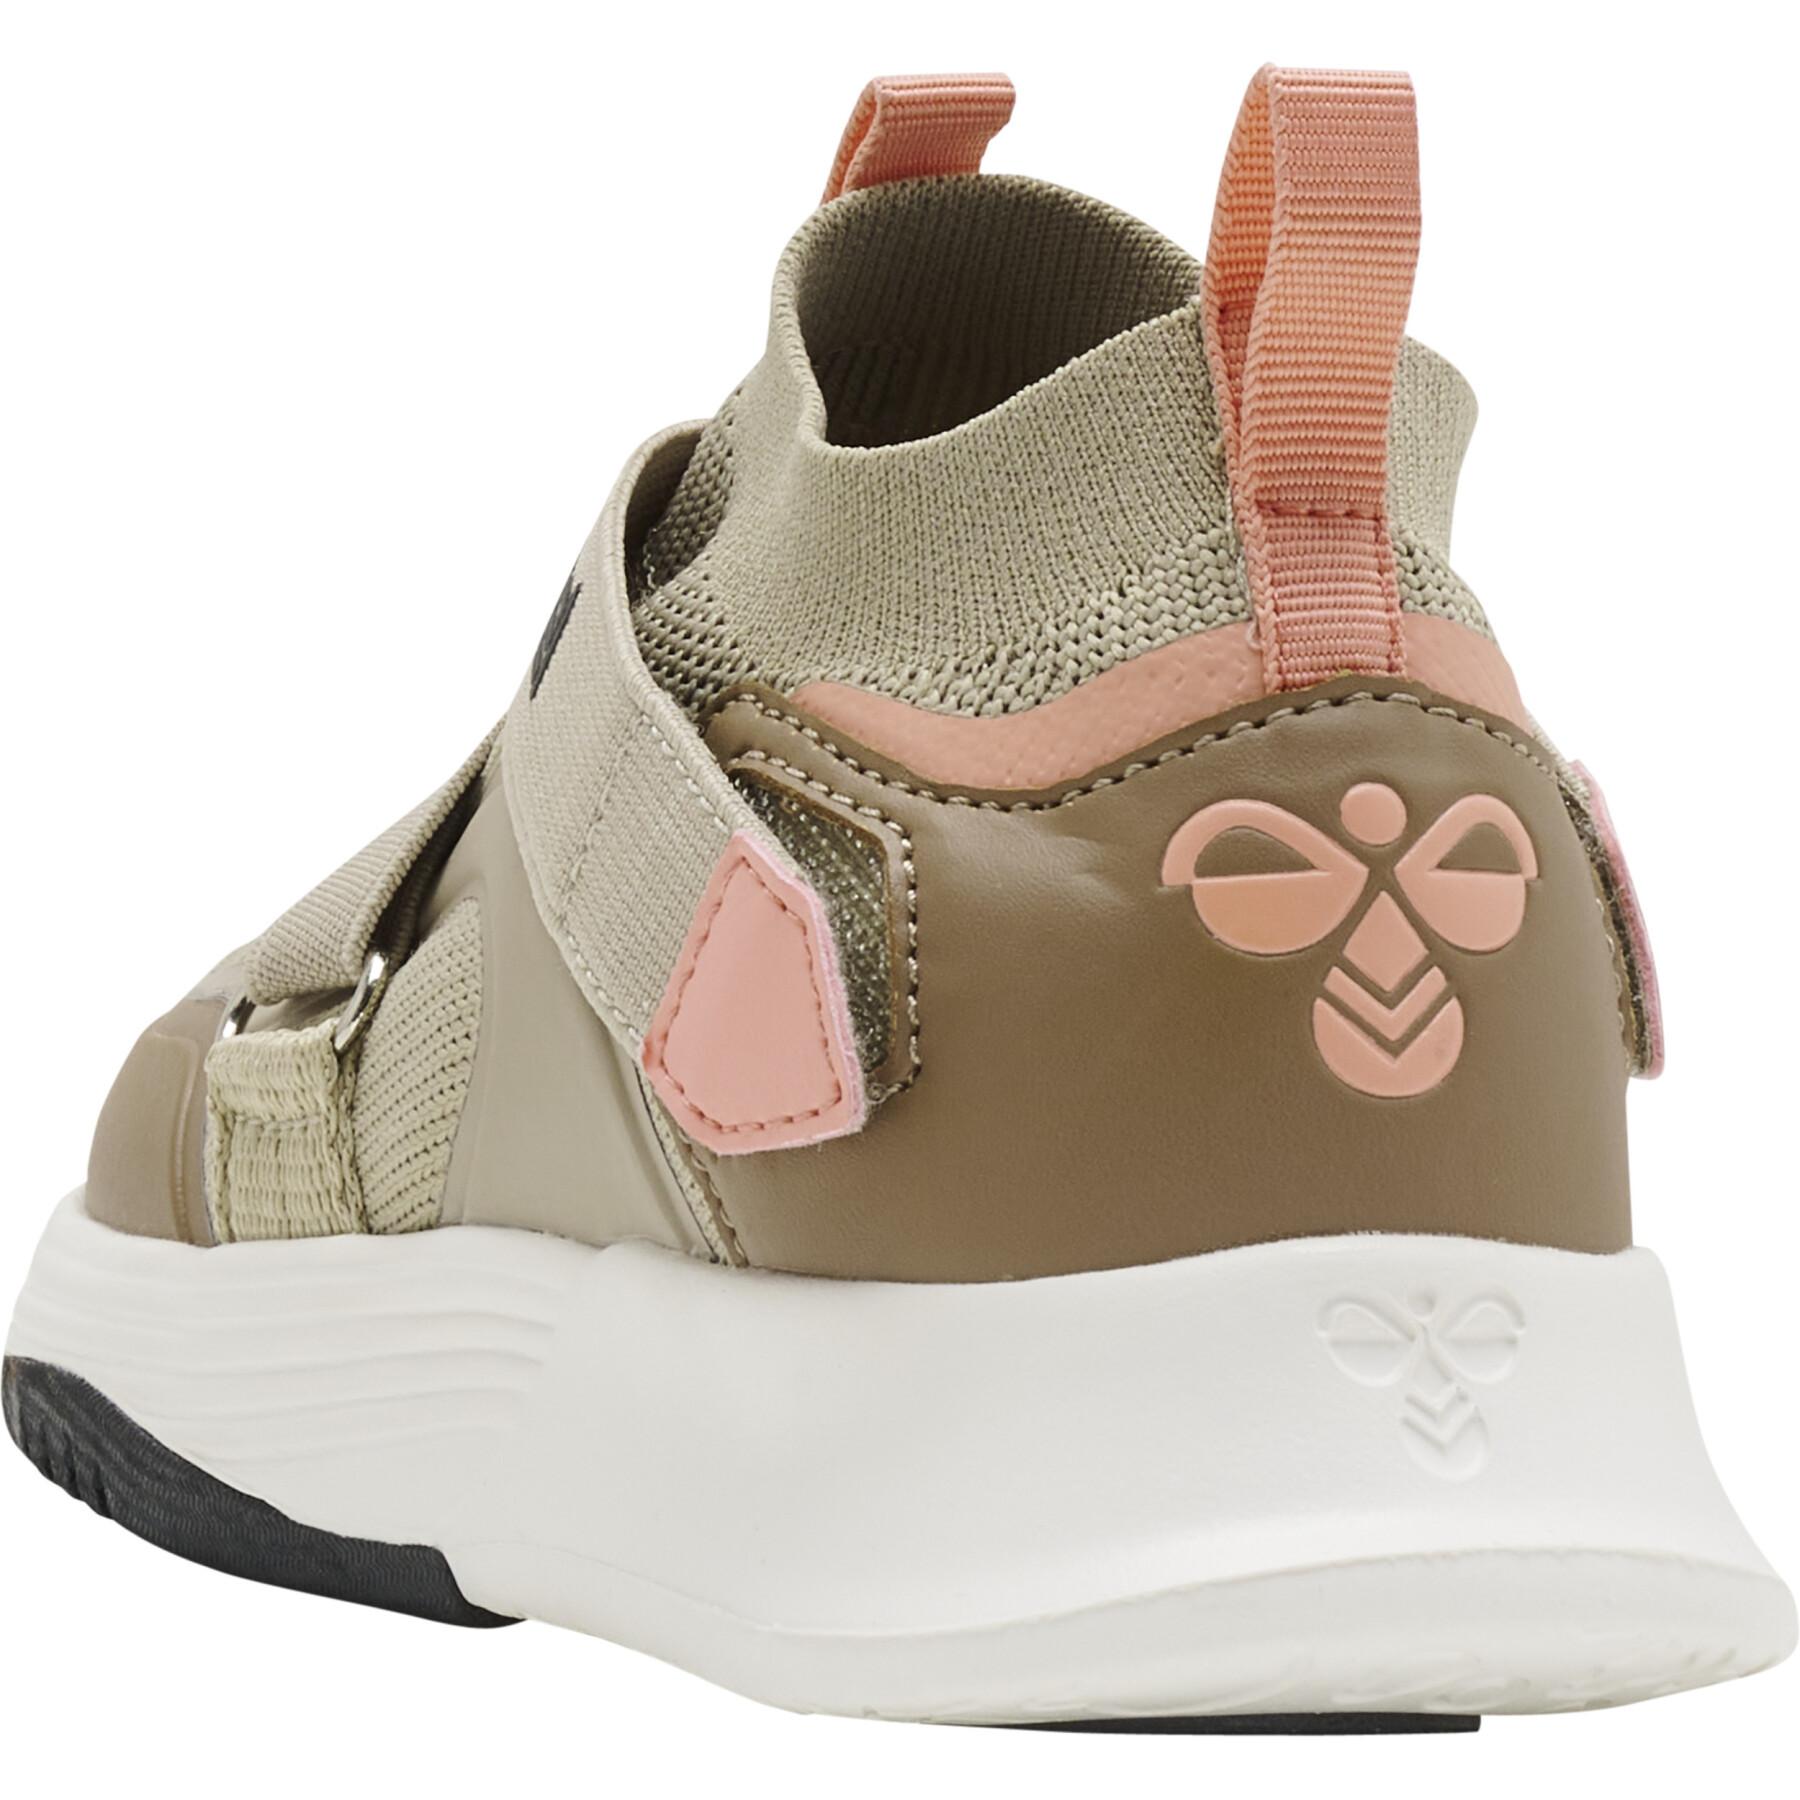 Children's sneakers Hummel Hml8000 Recycled